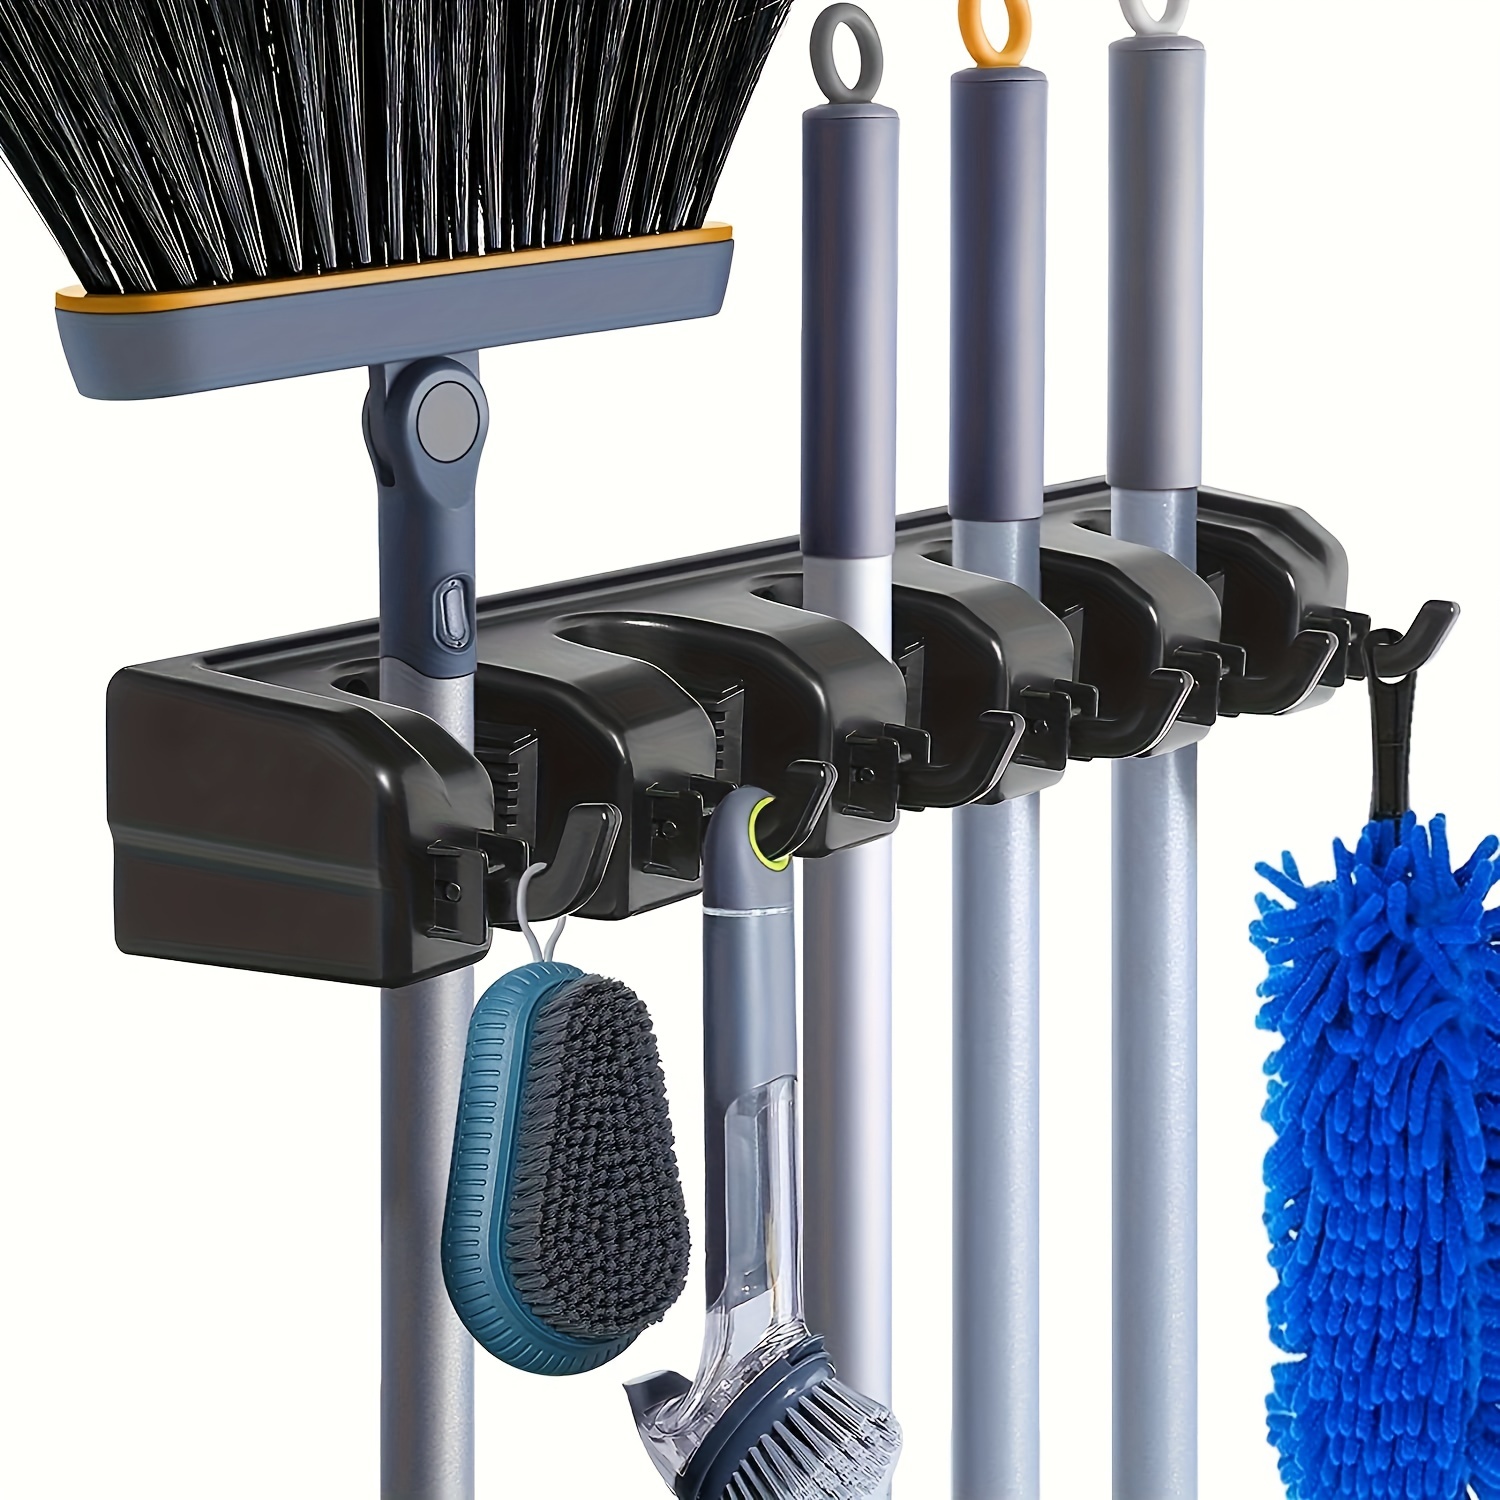 Commercial Mop and Broom Holder, Wall Mount Hanger